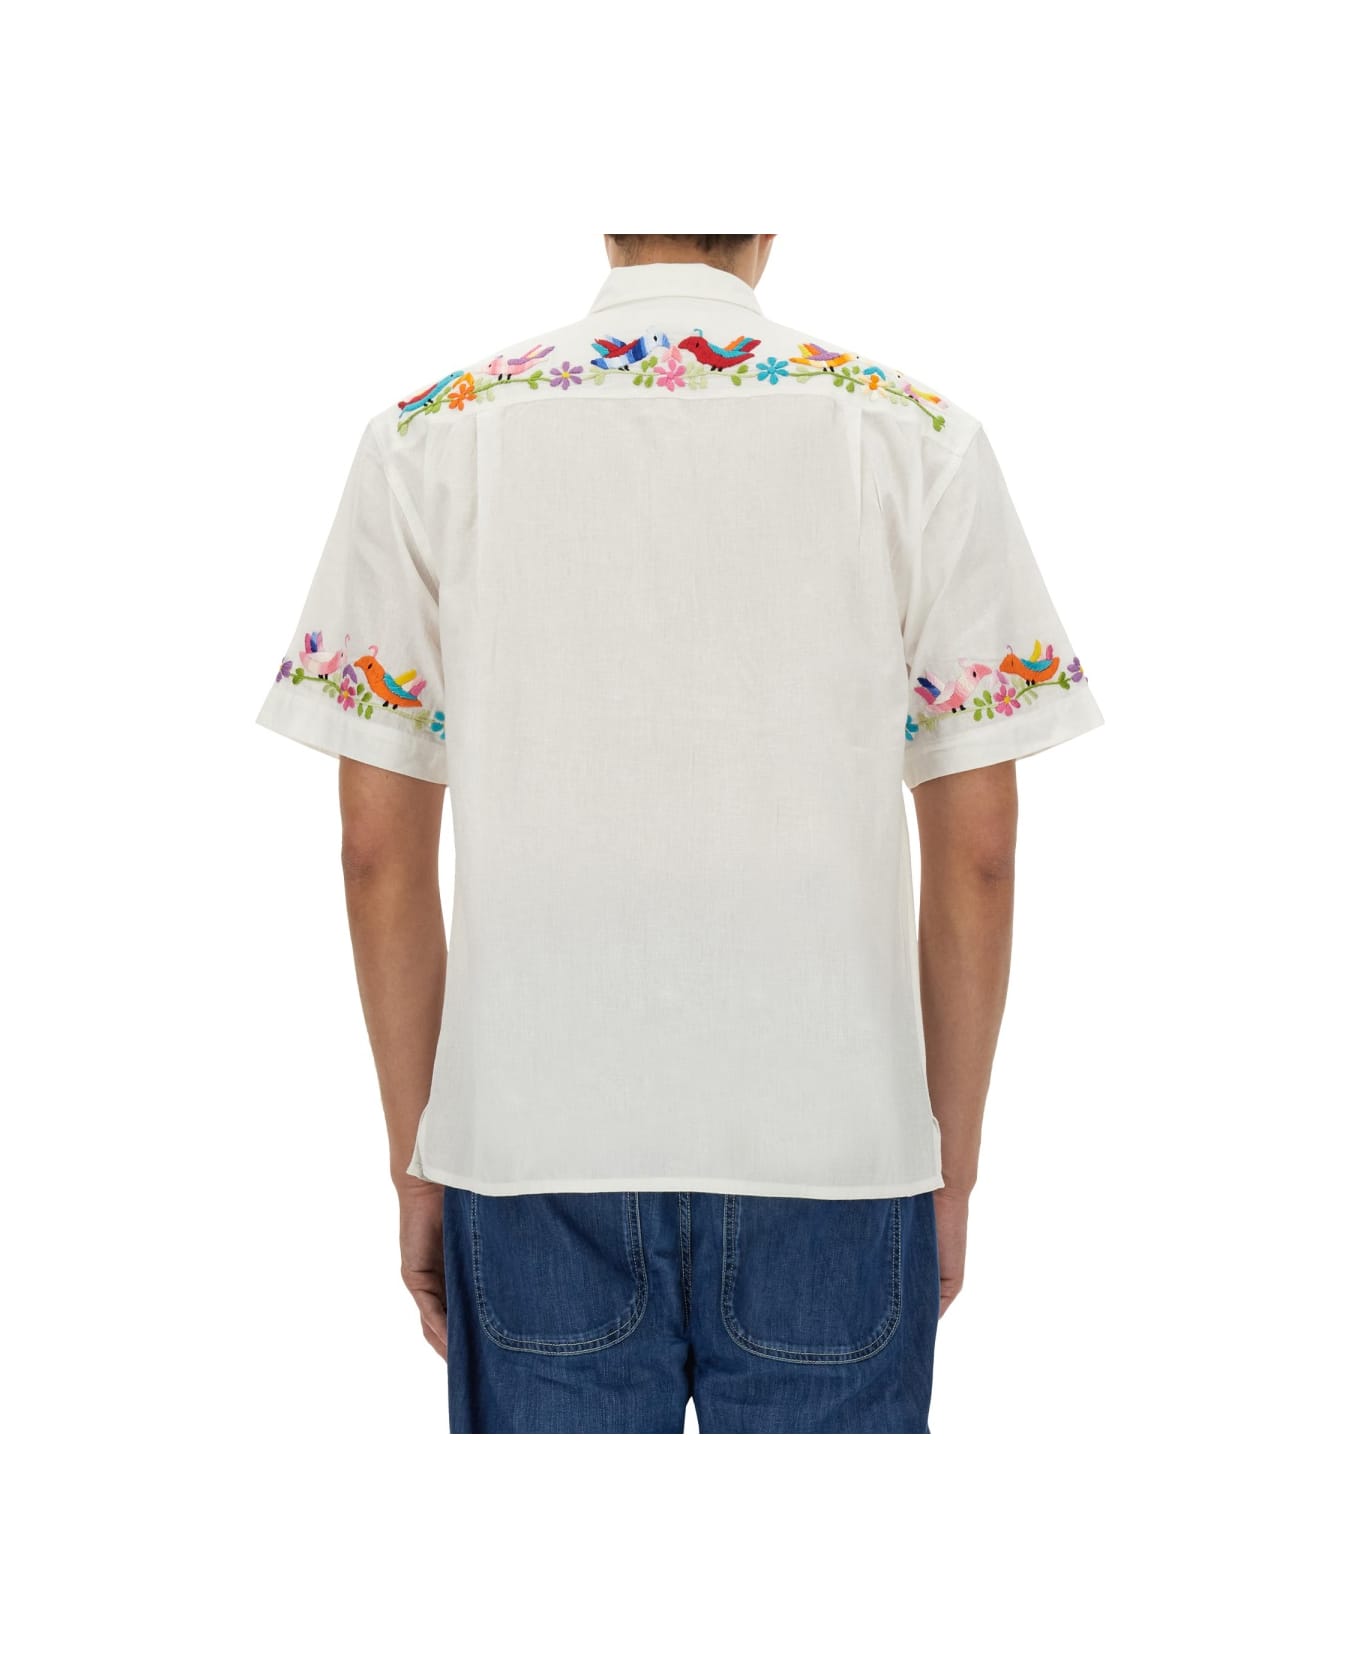 YMC Shirt With Embroidery - POWDER シャツ